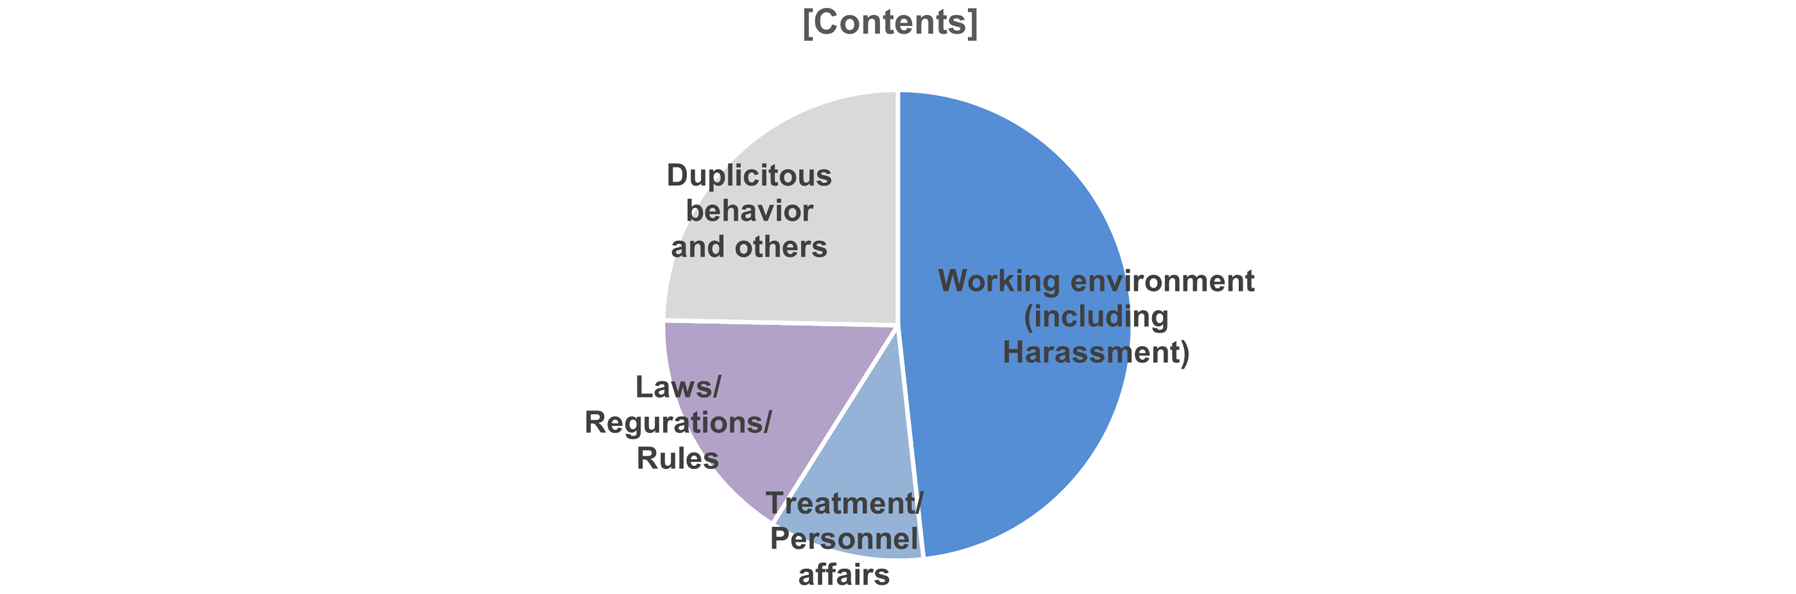 ”Contact Points” pie chart: “External lawyers” account for just under 1/4 of total, and “Internal control promotion departments” account for just over 3/4 of total. “Areas of concern” pie chart:  “Working environment” account for at least half,  “Treatment/personnel affairs” account for around 10%,  “Laws/regulations/rules” account for just under 20%, and “Others” account for just under 20%